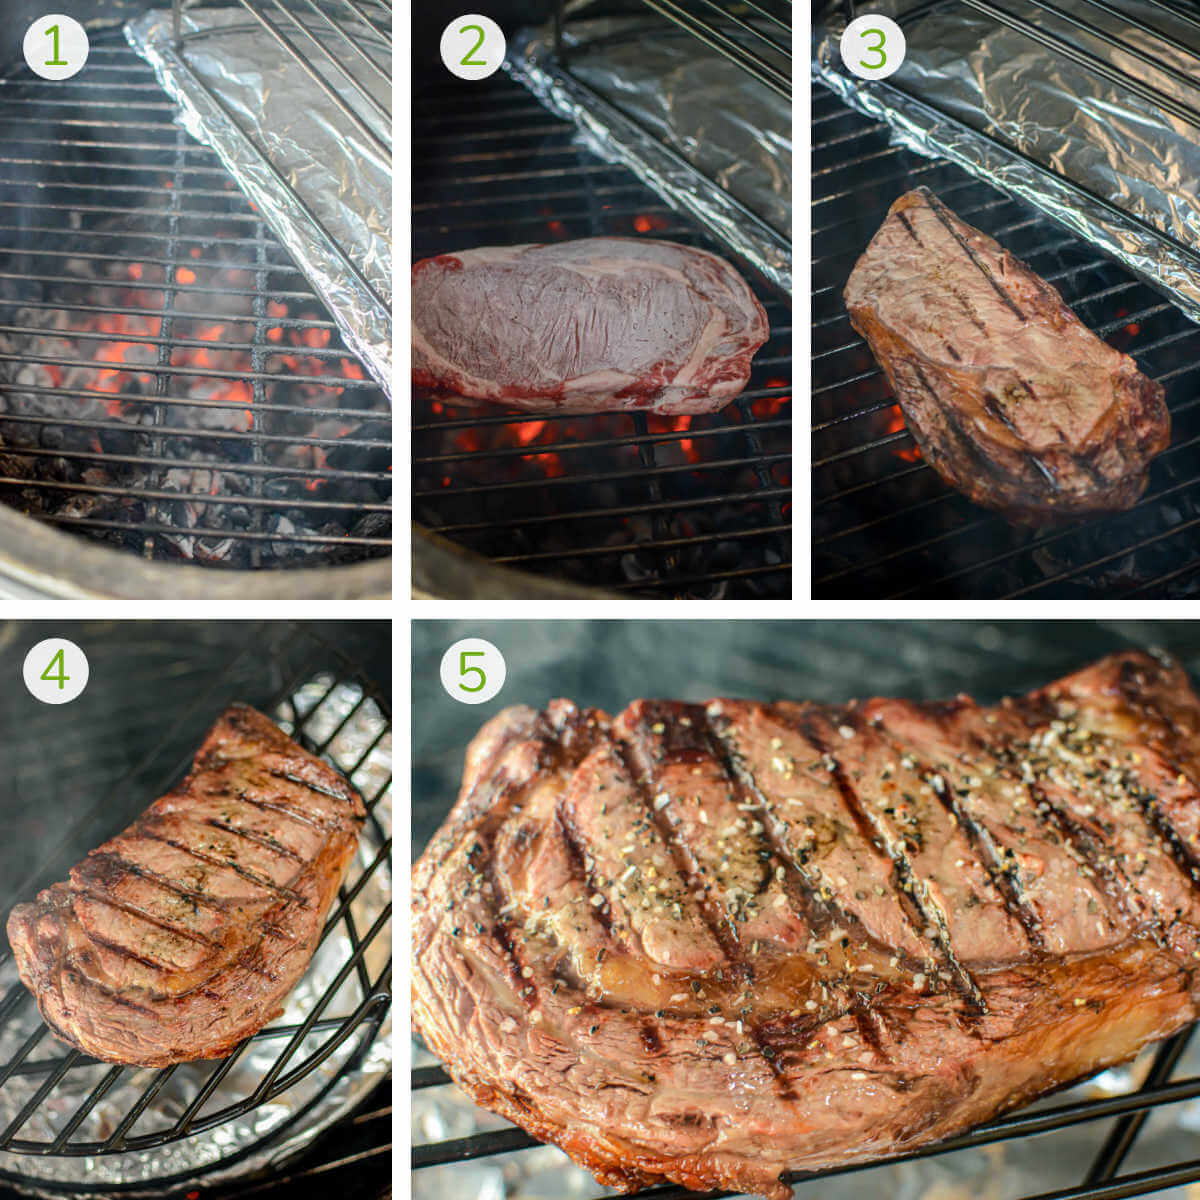 process photos showing how to set up the grill for two zone cooking, adding the frozen steak, seasoning and putting on indirect heat to finish.